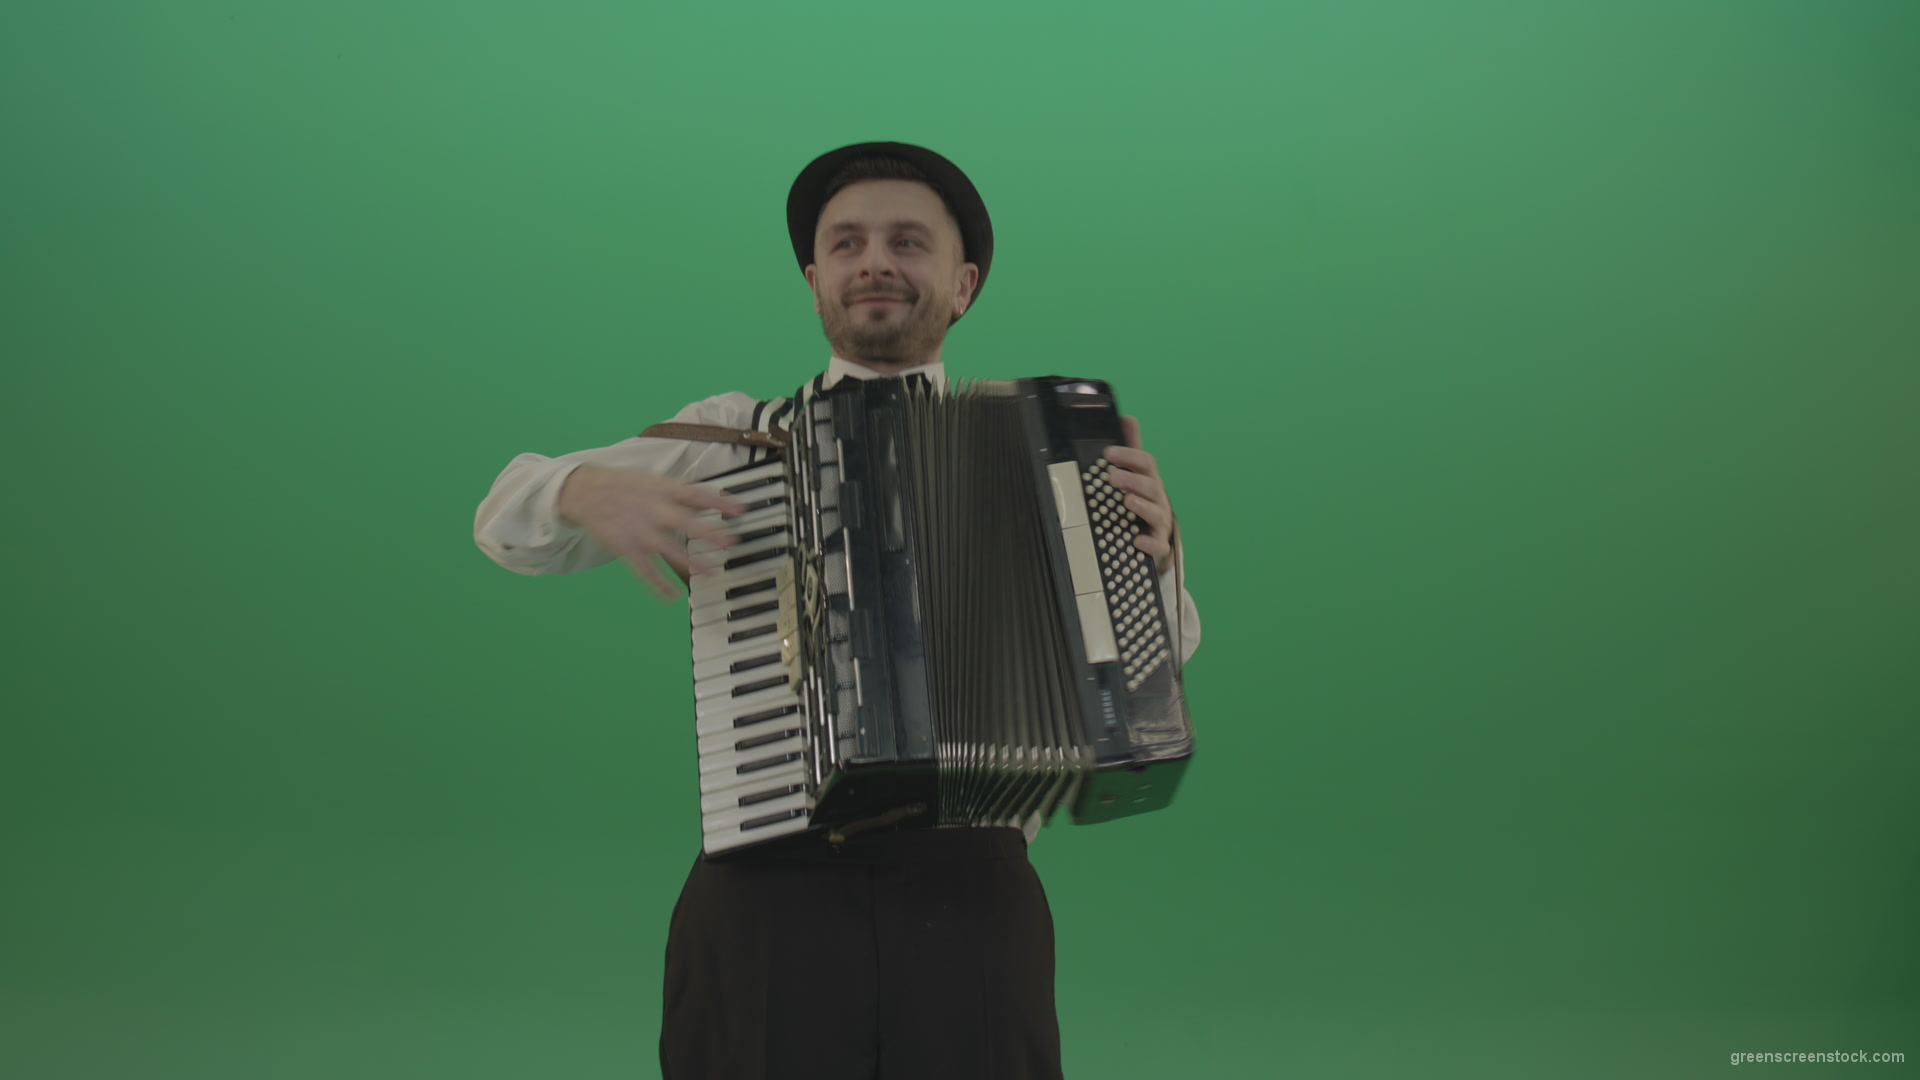 Virtuoso-player-man-with-Accordion-isolated-on-green-screen-in-front-view-1_007 Green Screen Stock